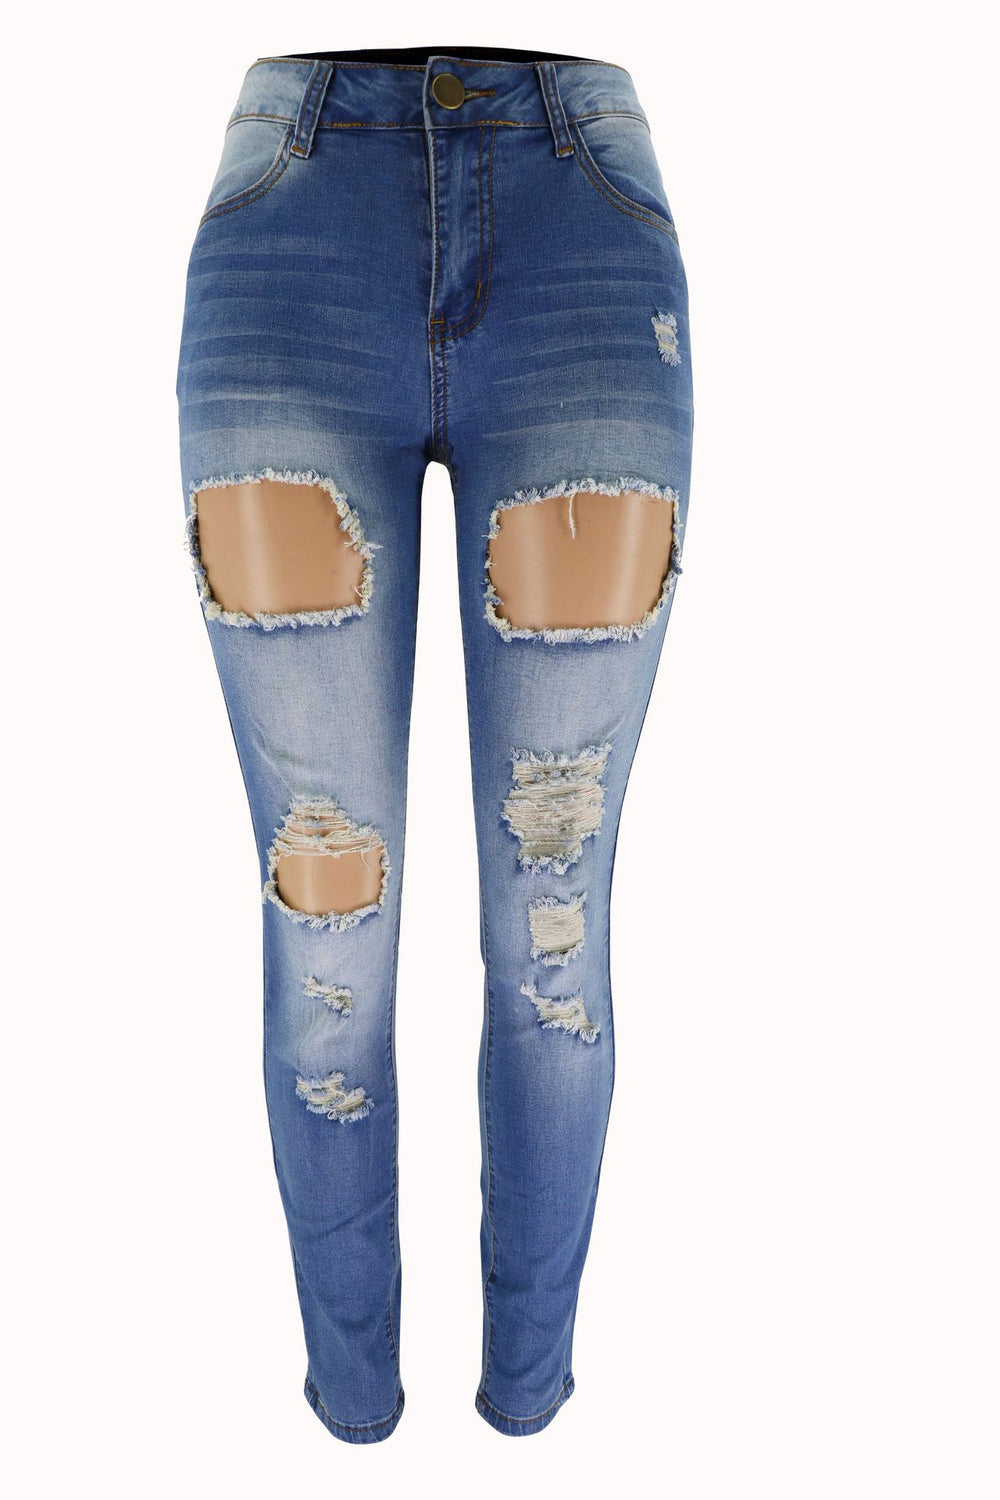 Spring Summer Ripped High Waist Slim Jeans Women Trousers